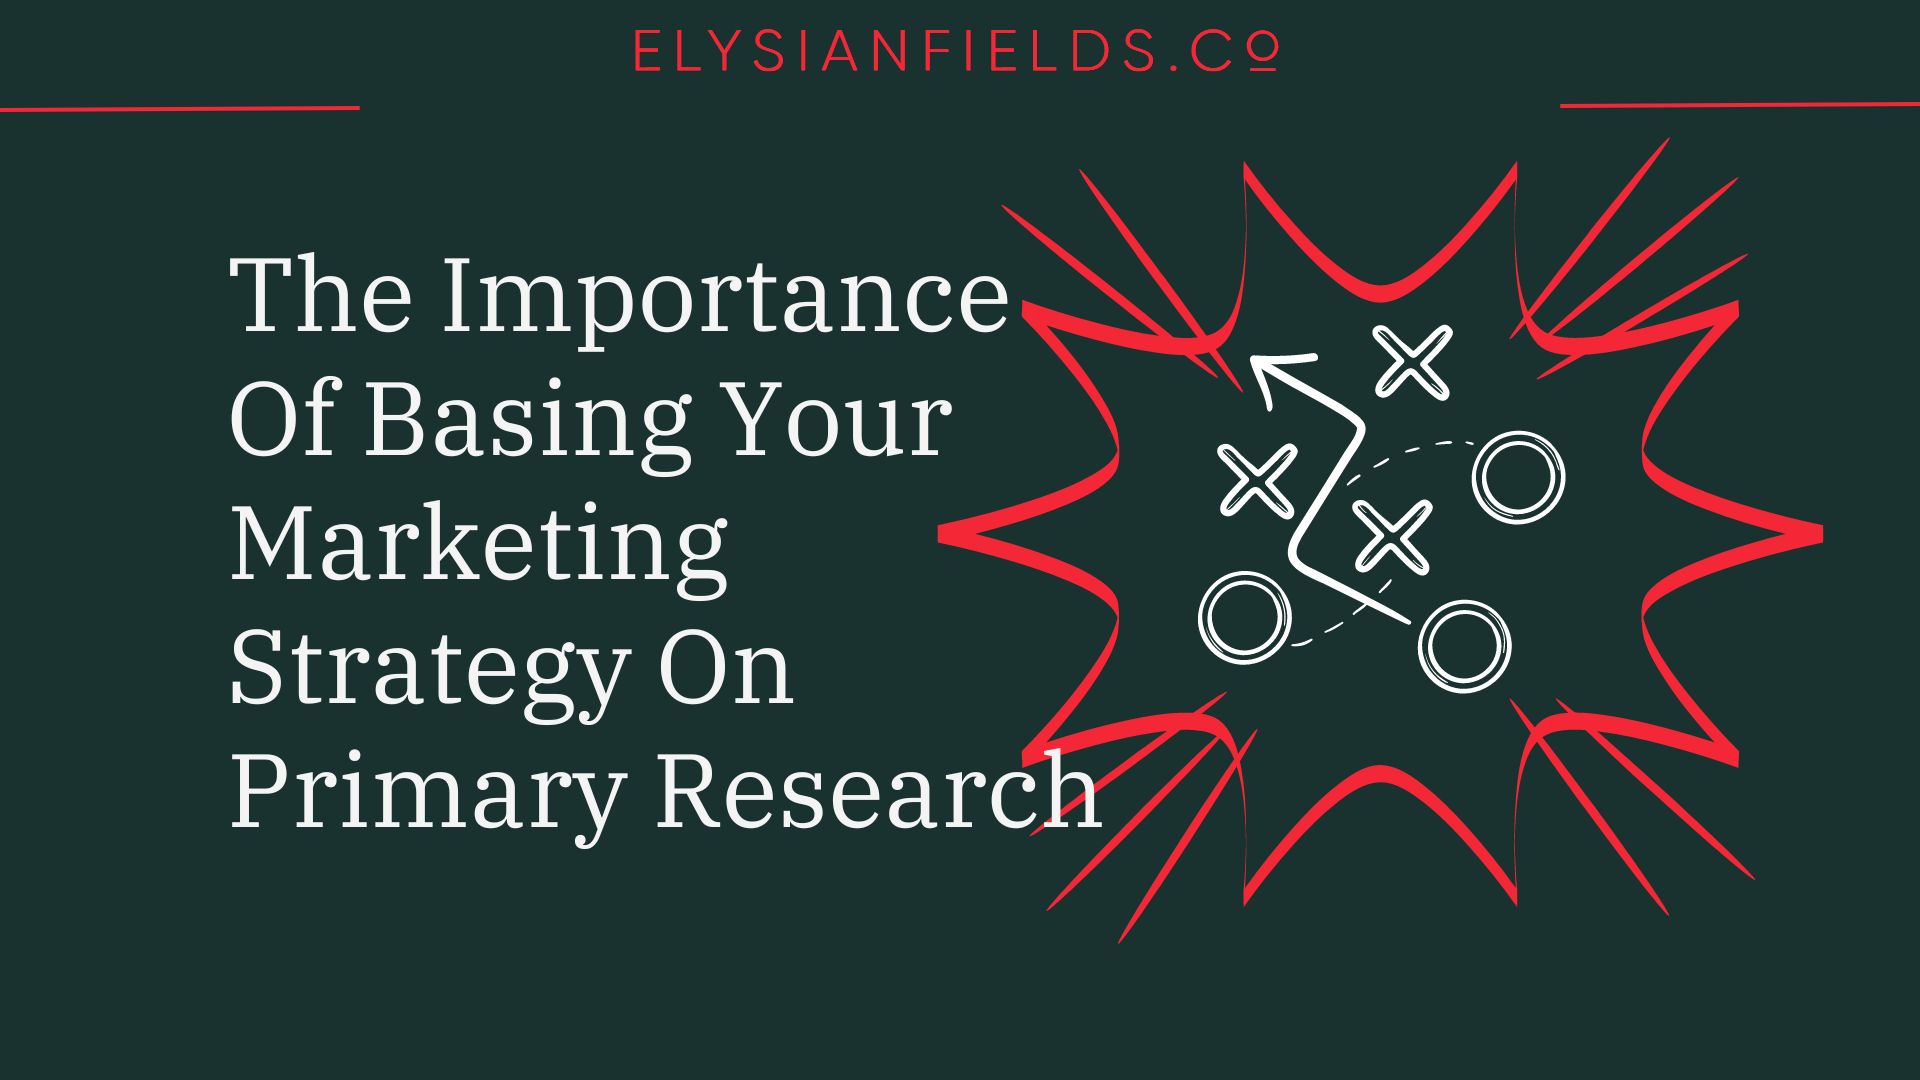 The Importance Of Basing Your Marketing Strategy On Primary Research